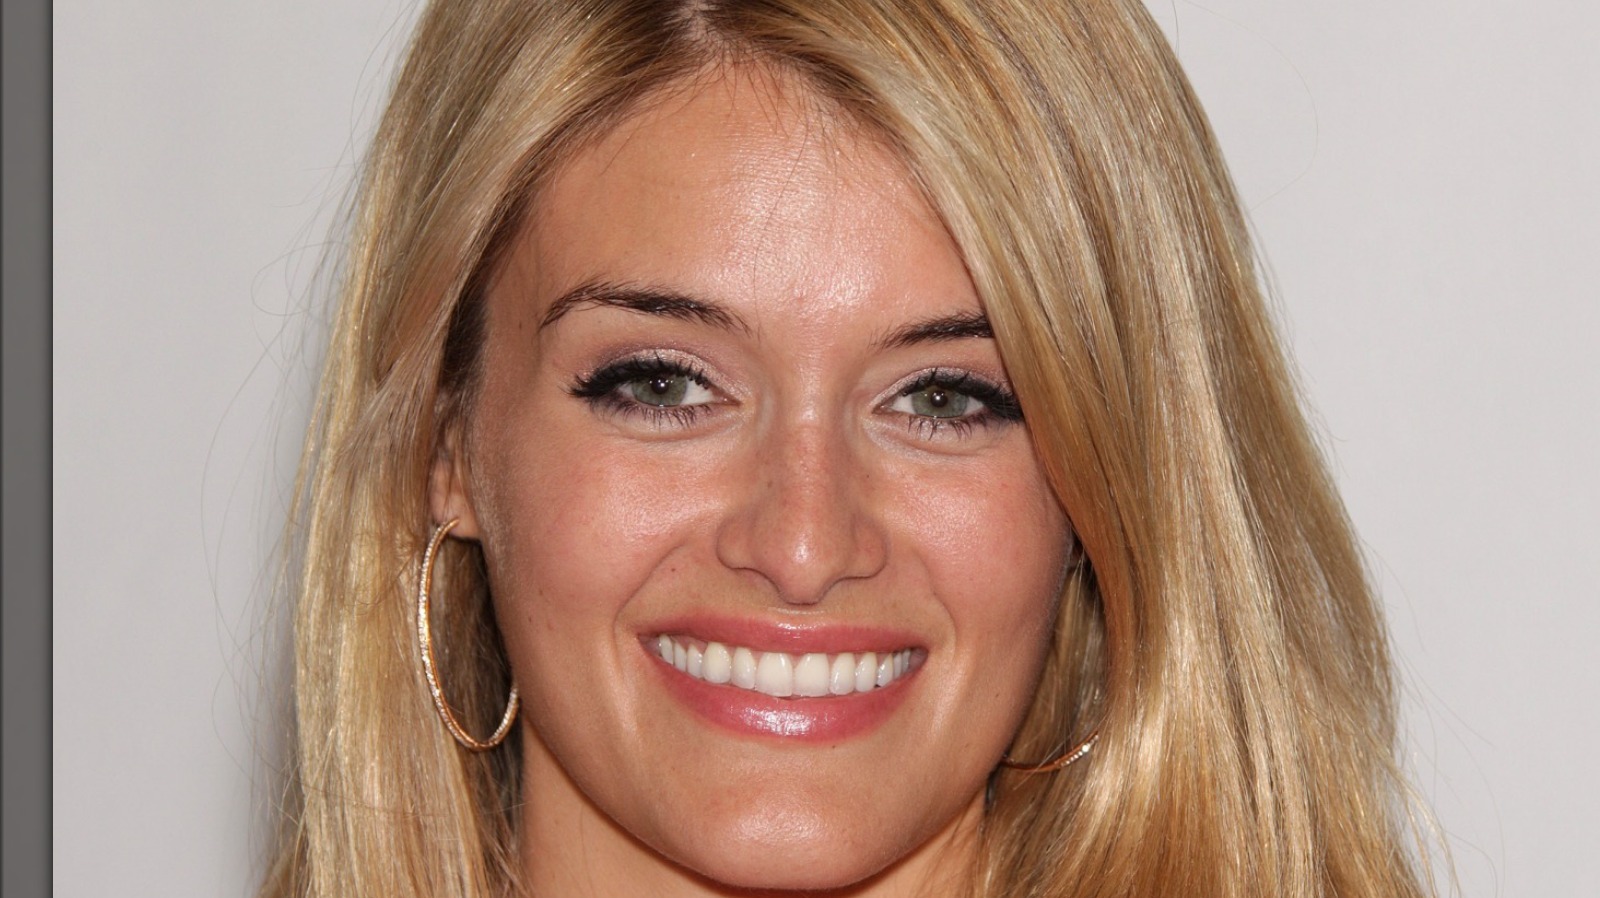 Daphne Oz Net Worth - A Look At How She Built Her Fortune